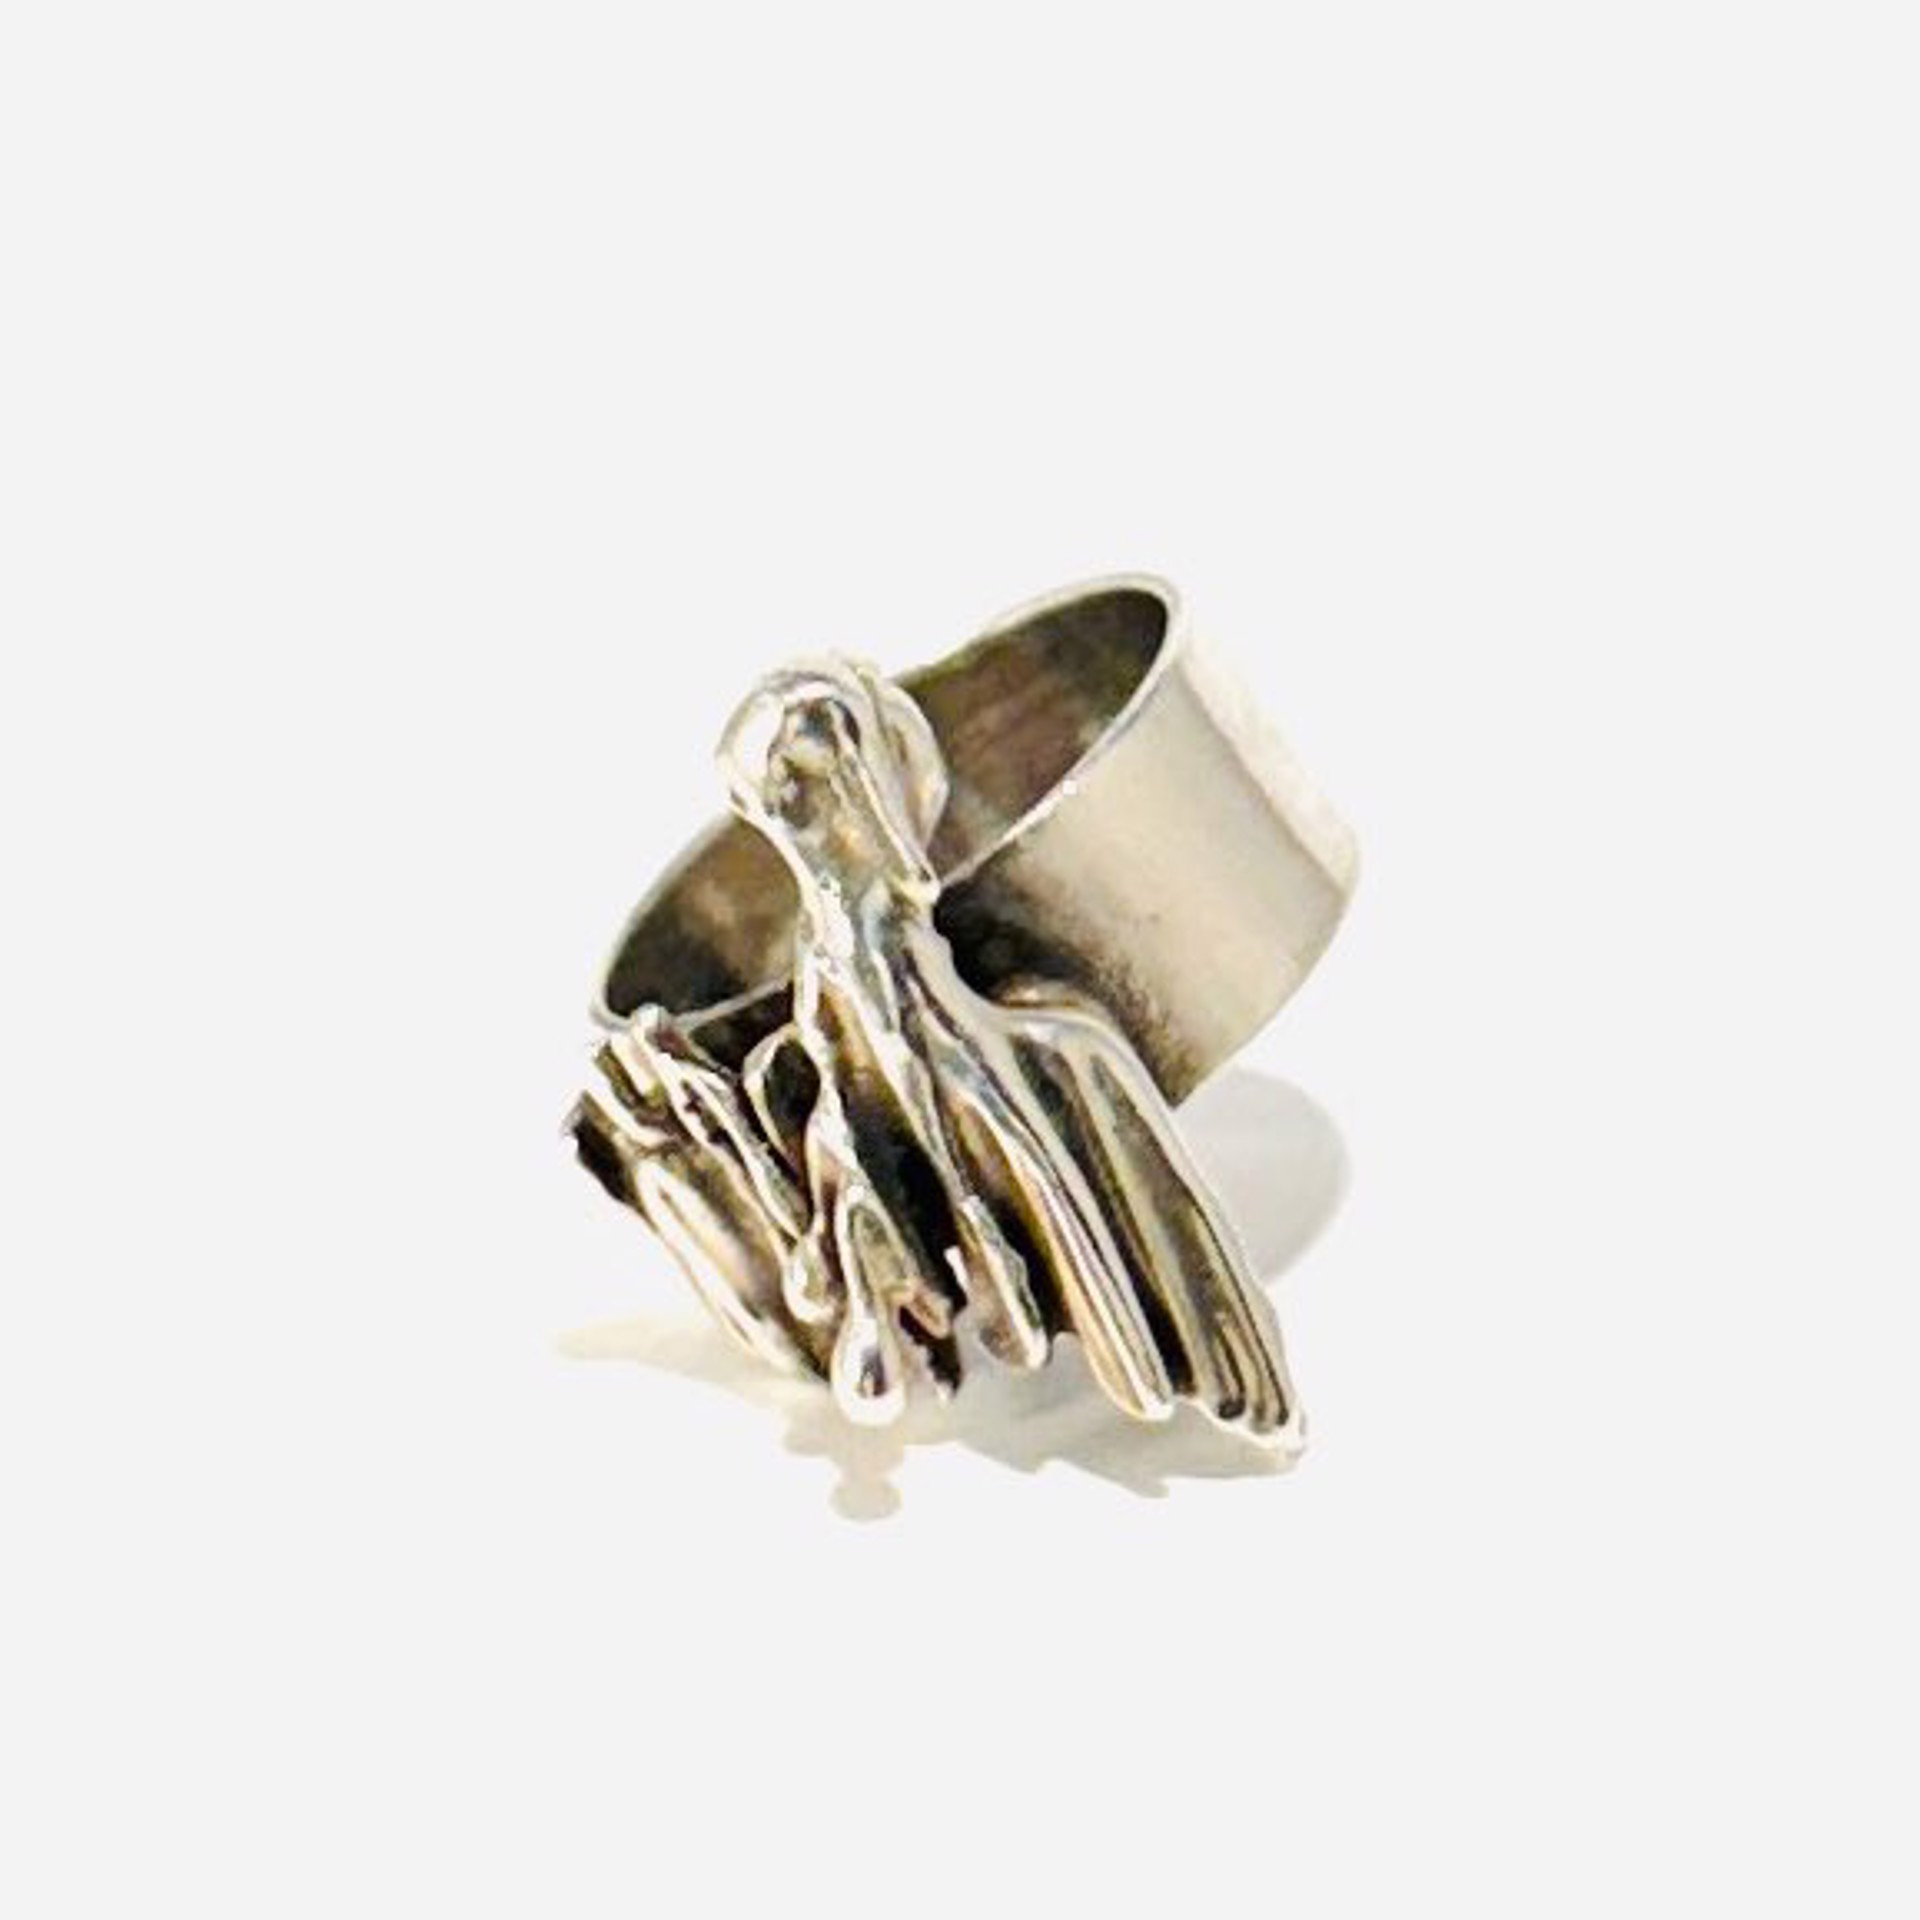 Pine Straw Cast Sterling Ring sz8.5 AB23-71 by Anne Bivens